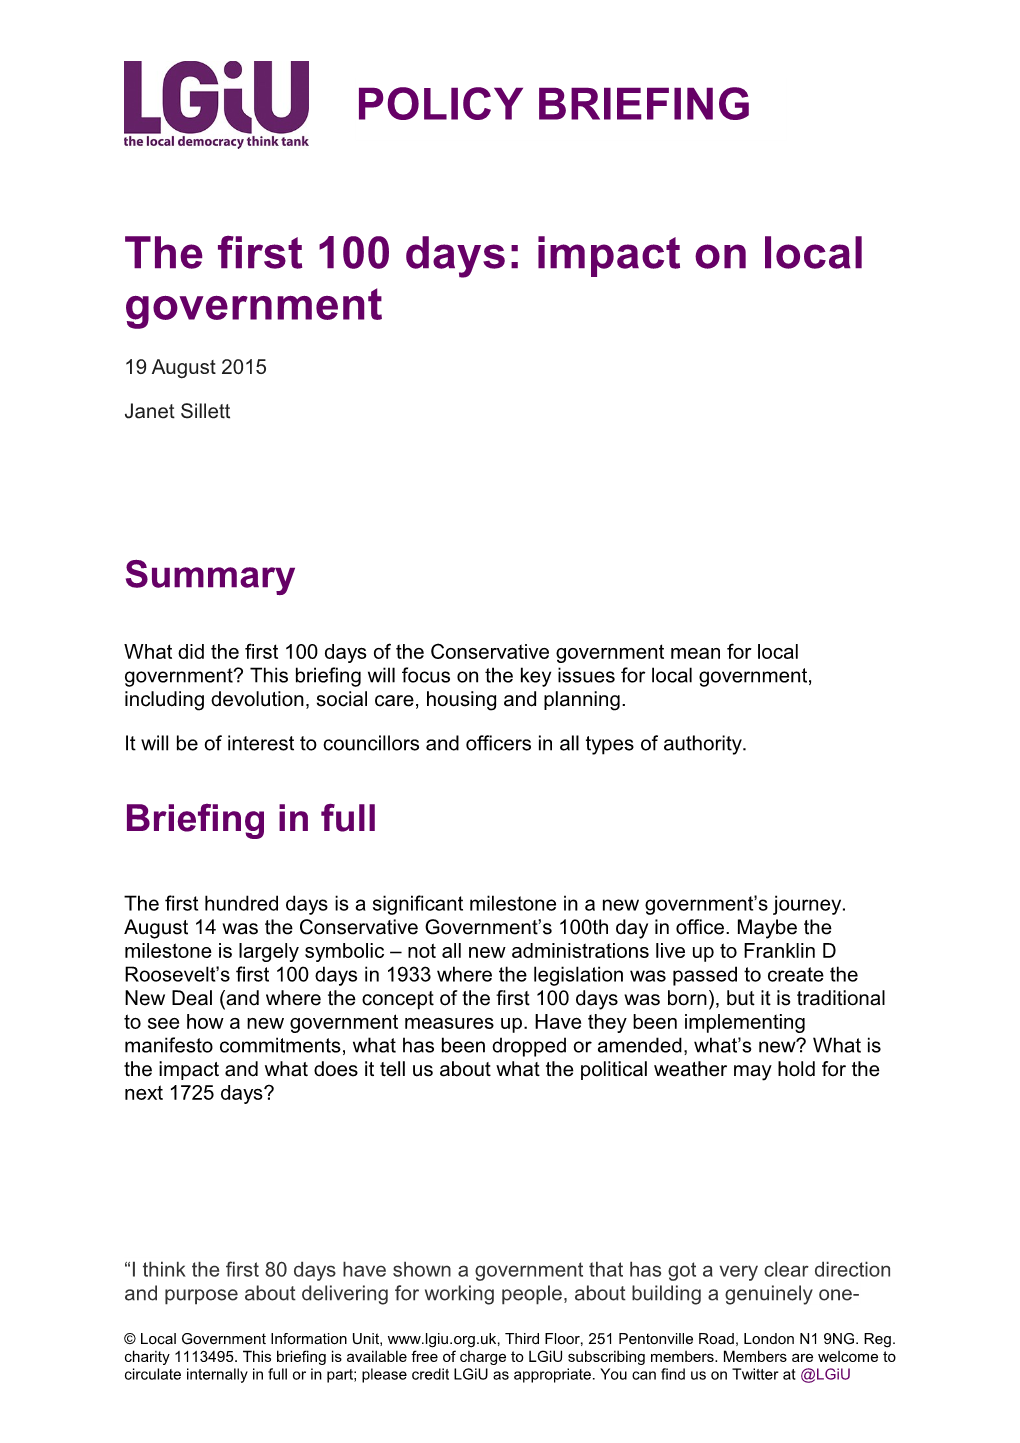 The First 100 Days: Impact on Local Government